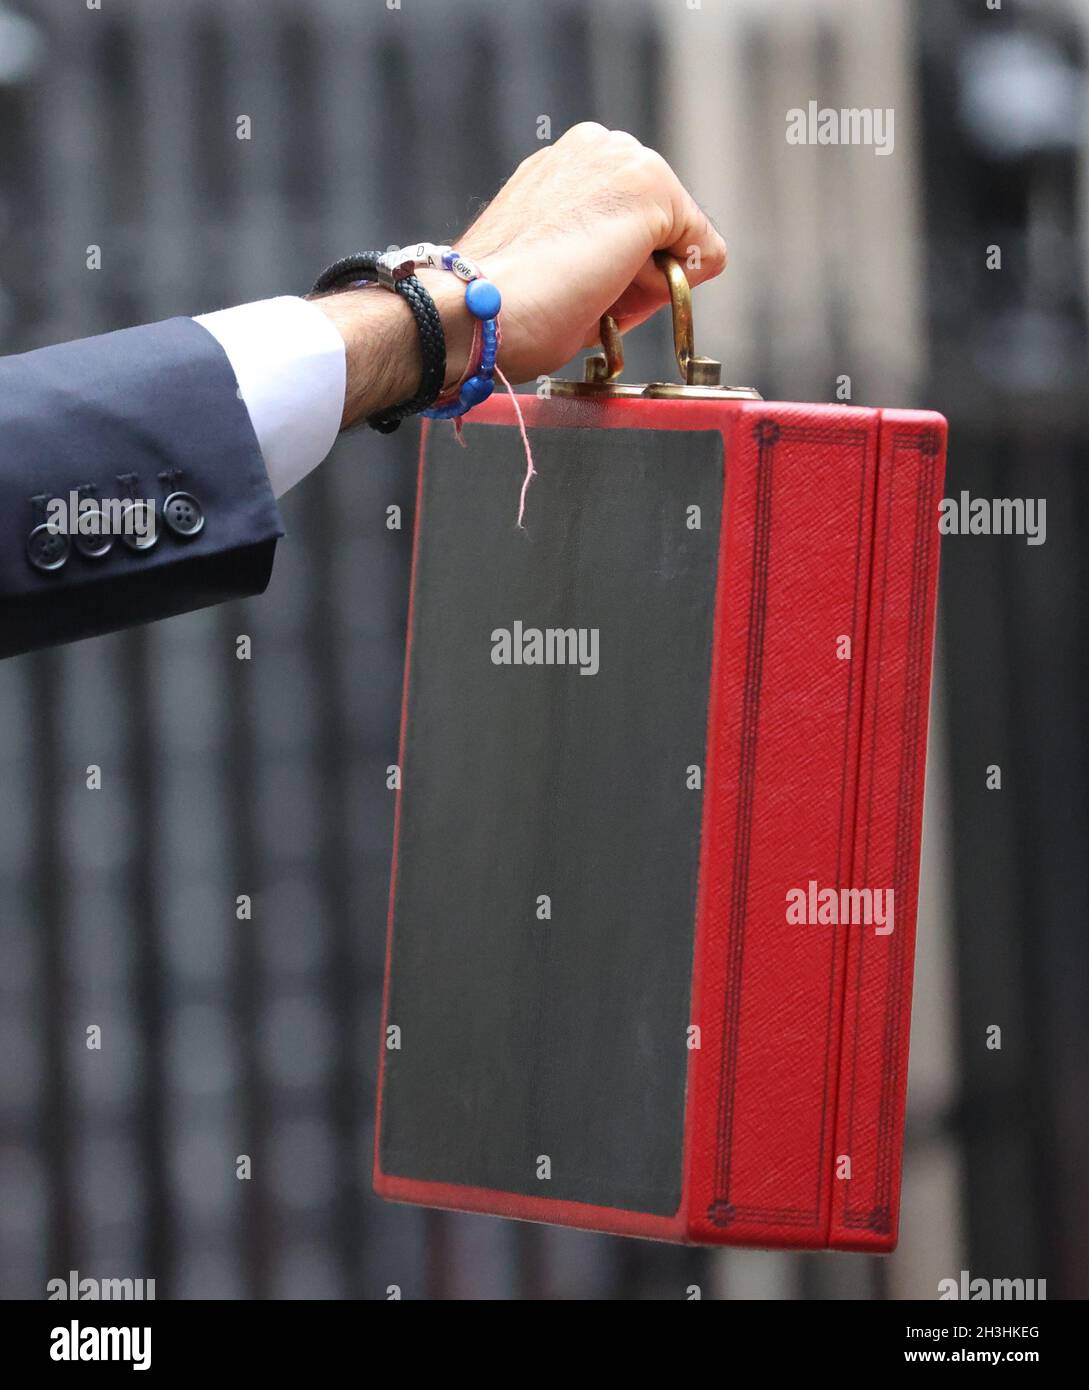 London, UK. 27th Oct, 2021. A LOVE charm on the bracelet of Rishi Sunak the Chancellor of the Exchequer with the red Budget Box outside Number 11 Downing Street before he delivers his Budget speech in The House of Commons at lunchtime. Budget Day, Downing Street, Westminster, London, October 27, 2021. Credit: Paul Marriott/Alamy Live News Stock Photo